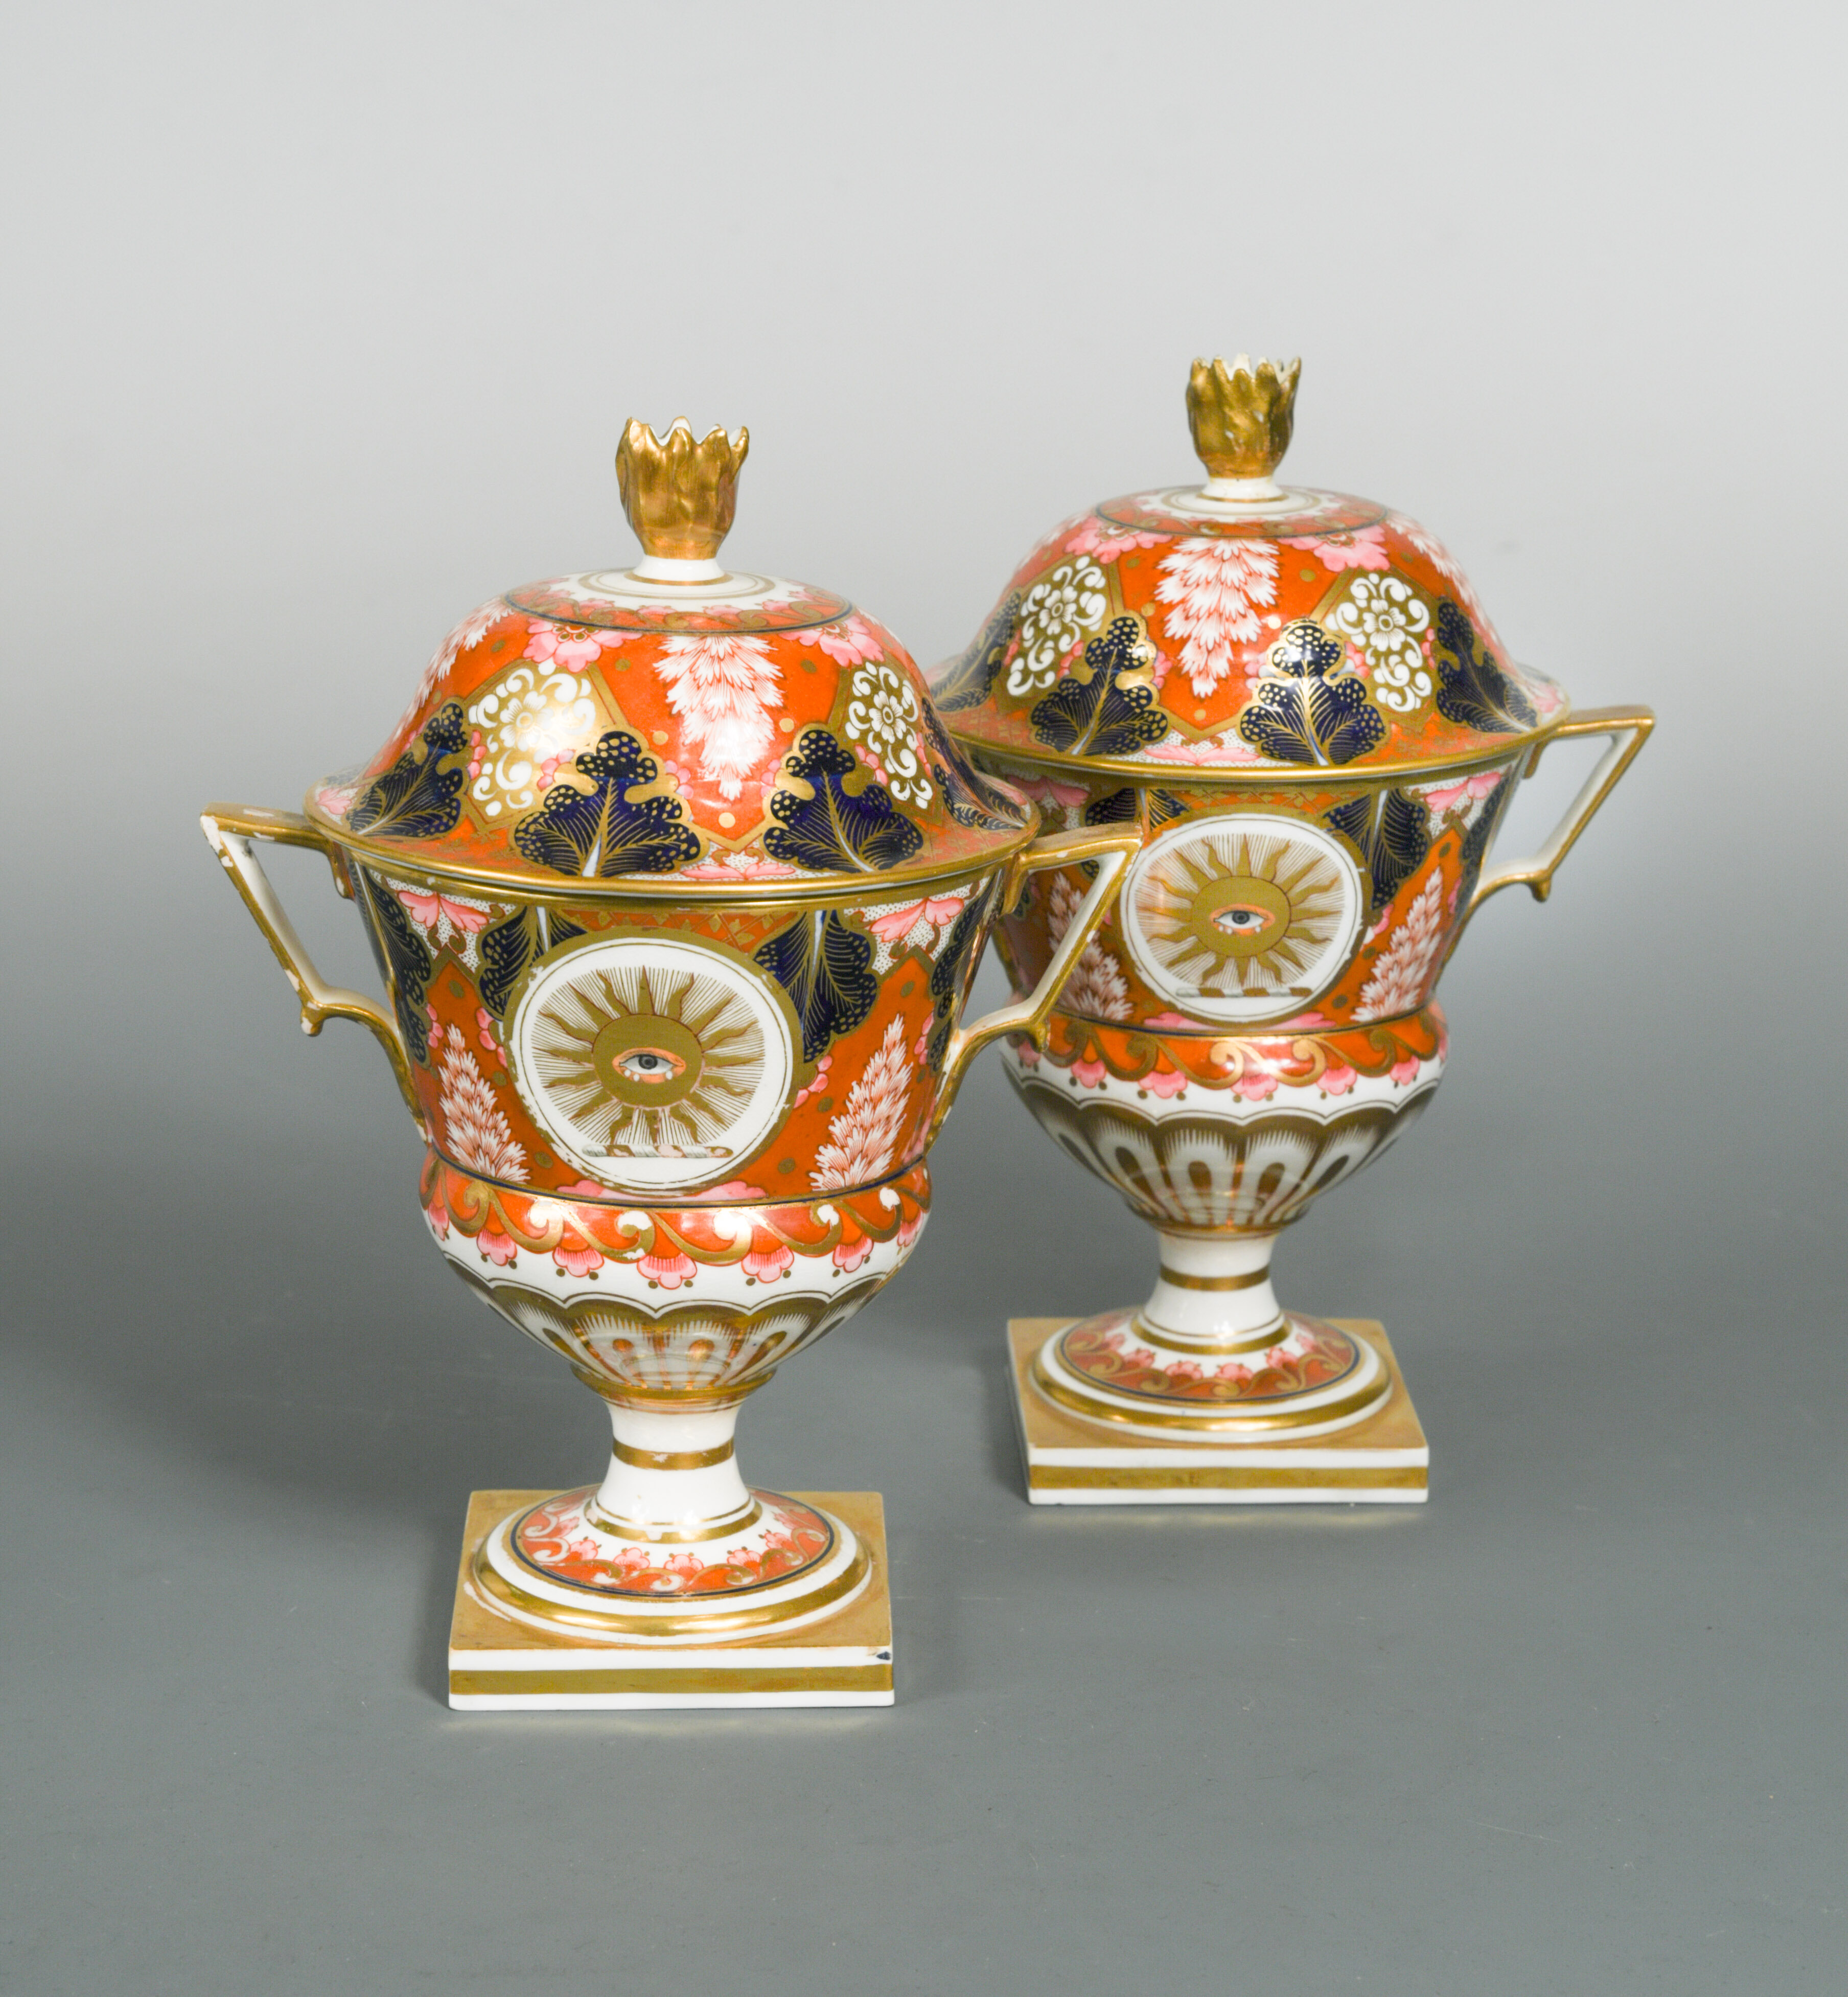 A pair of English porcelain two handled Masonic tureens and covers, probably Flight & Barr,